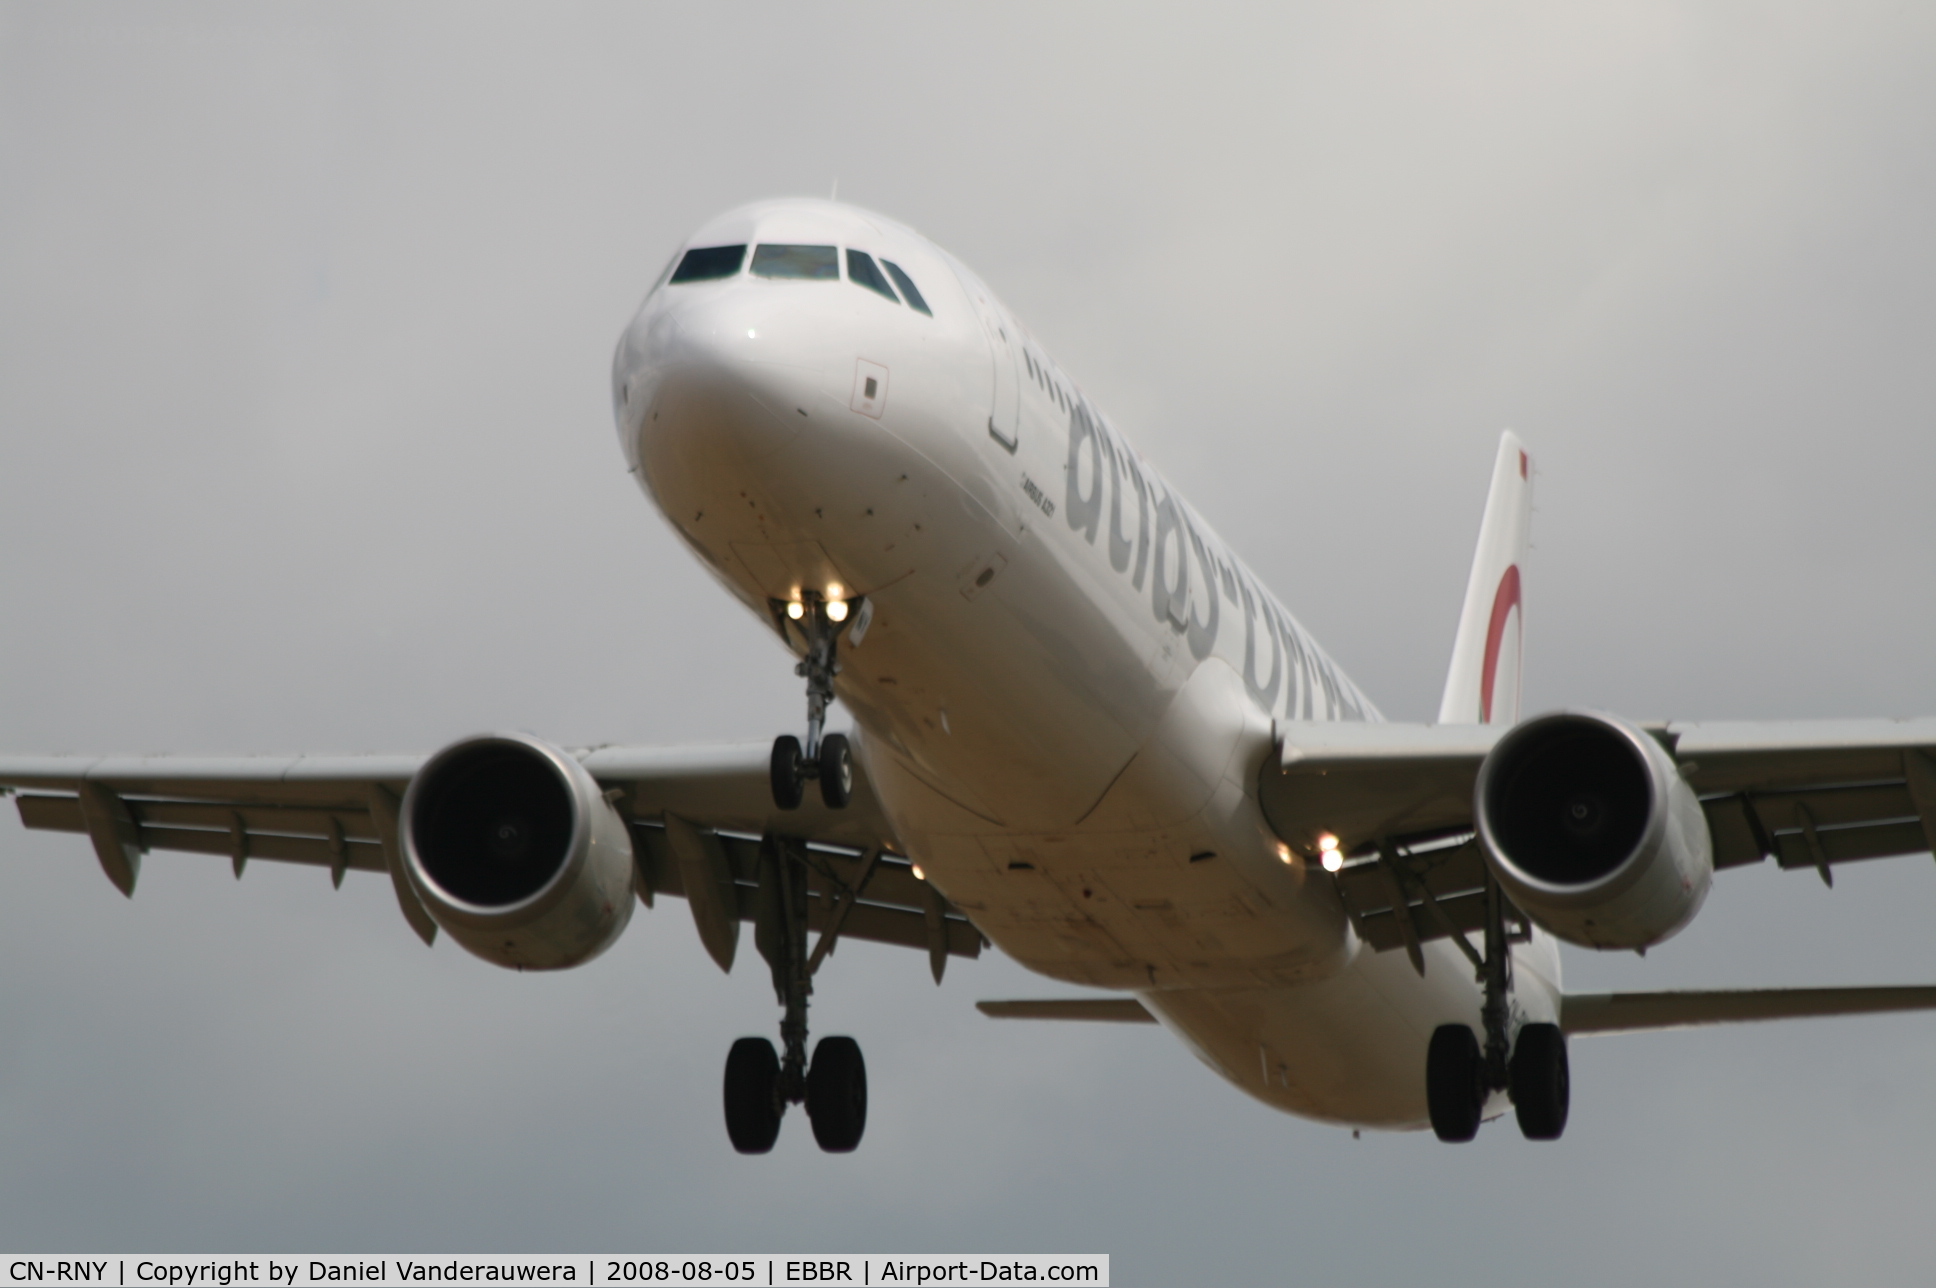 CN-RNY, 2003 Airbus A321-211 C/N 2076, arrival of flight AT838 to rwy 25L